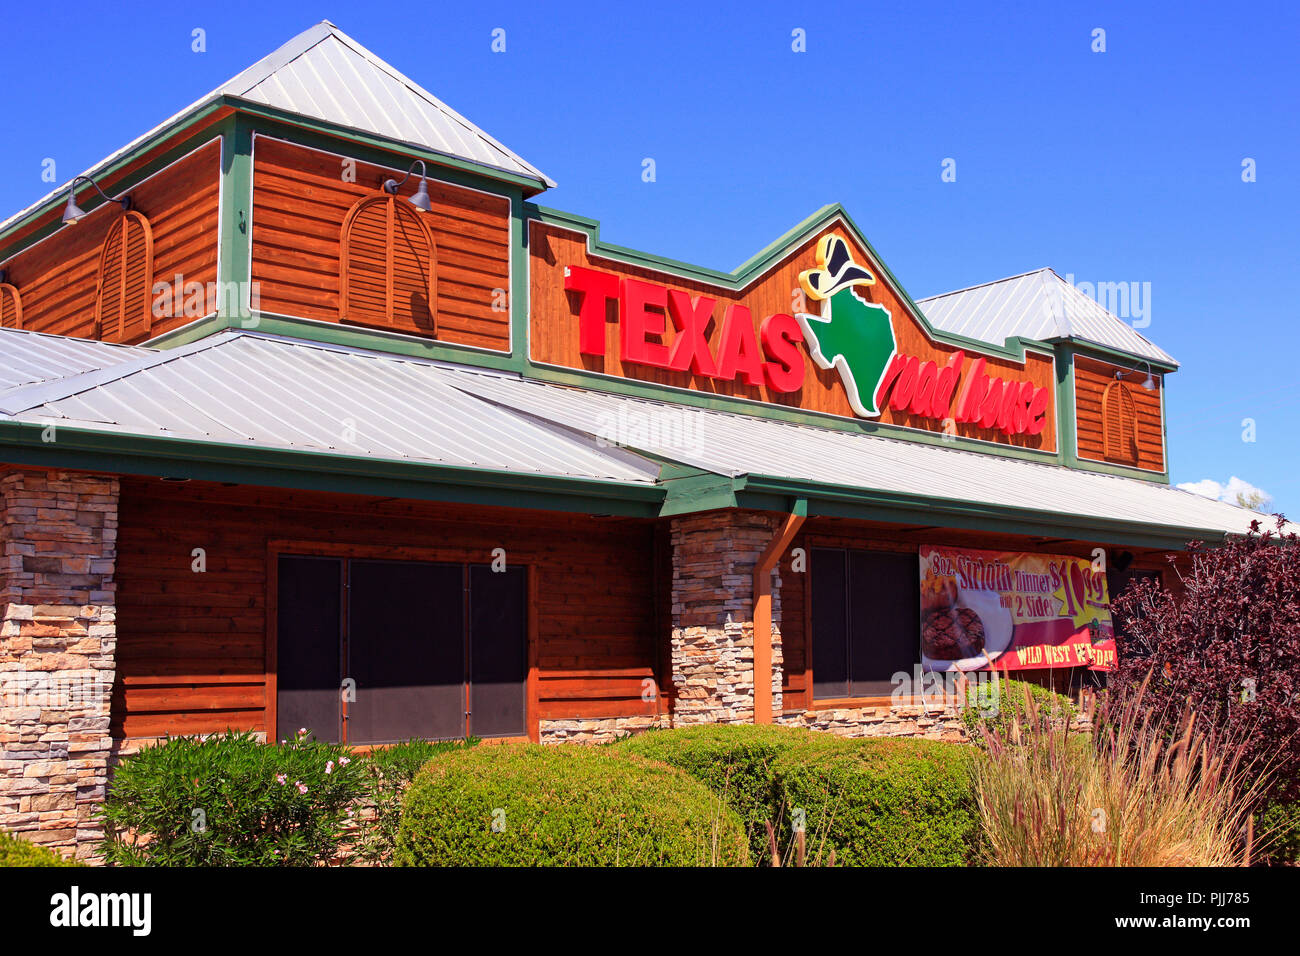 Texas Roadhouse steakhouse restaurant specializing in Steaks with a Western theme in Tucson, AZ Stock Photo